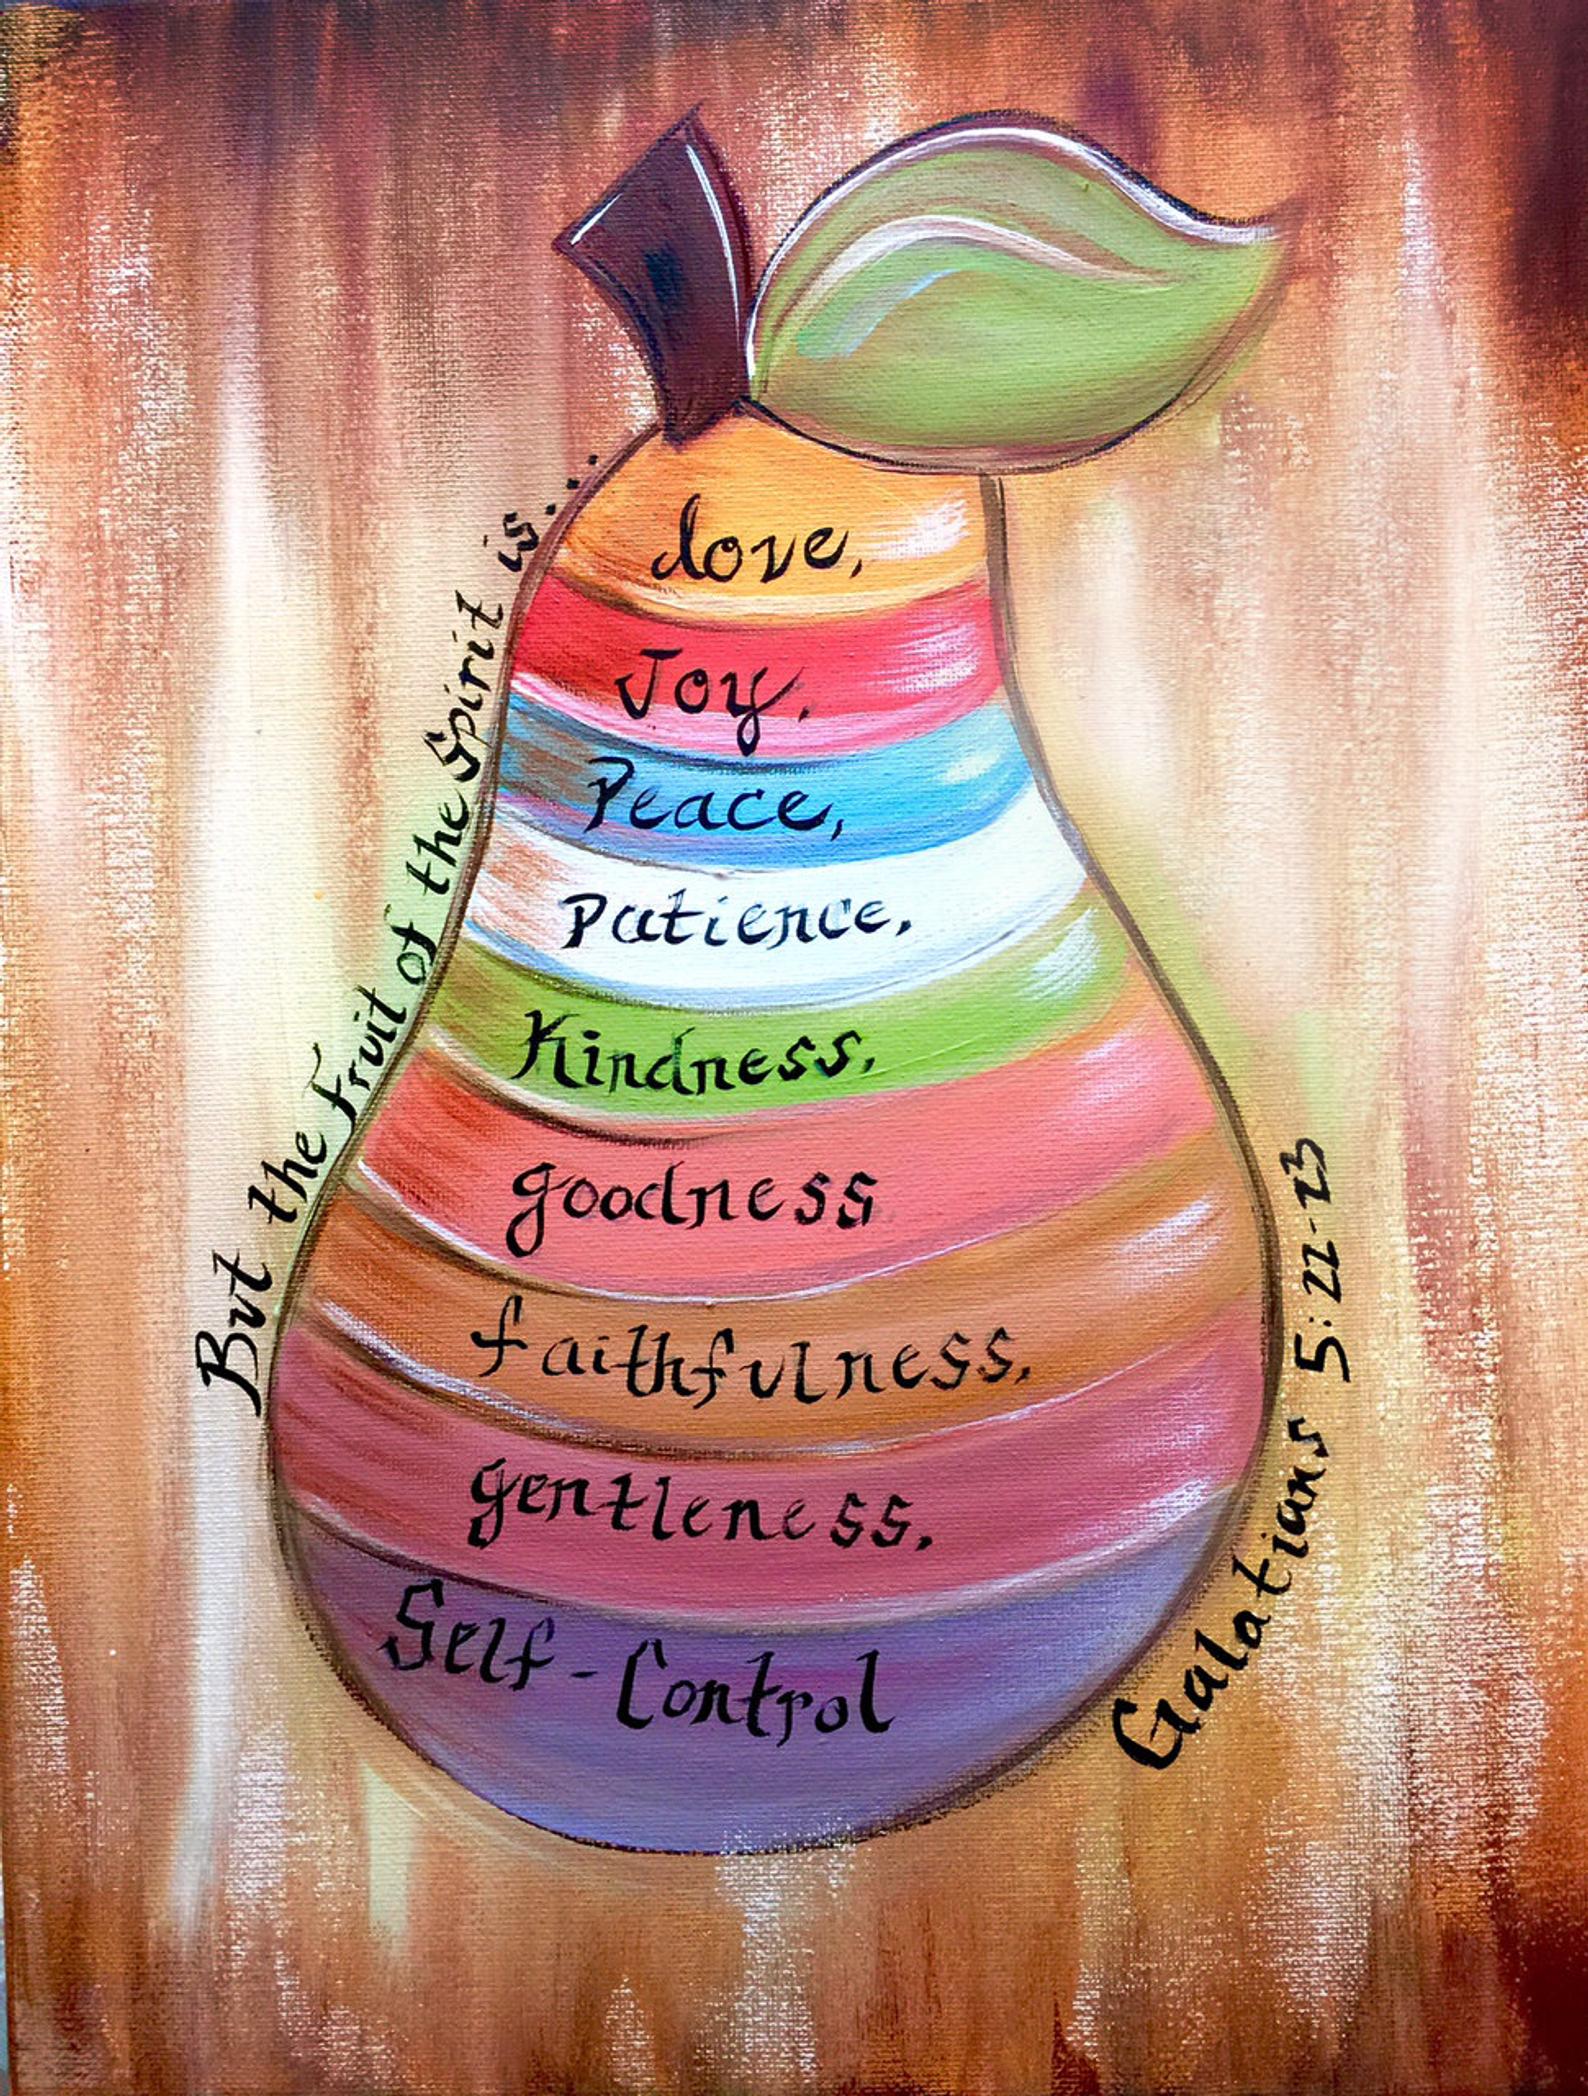 The fruit of the spirit painting, colorfully hand painted by Sheila A. Smith